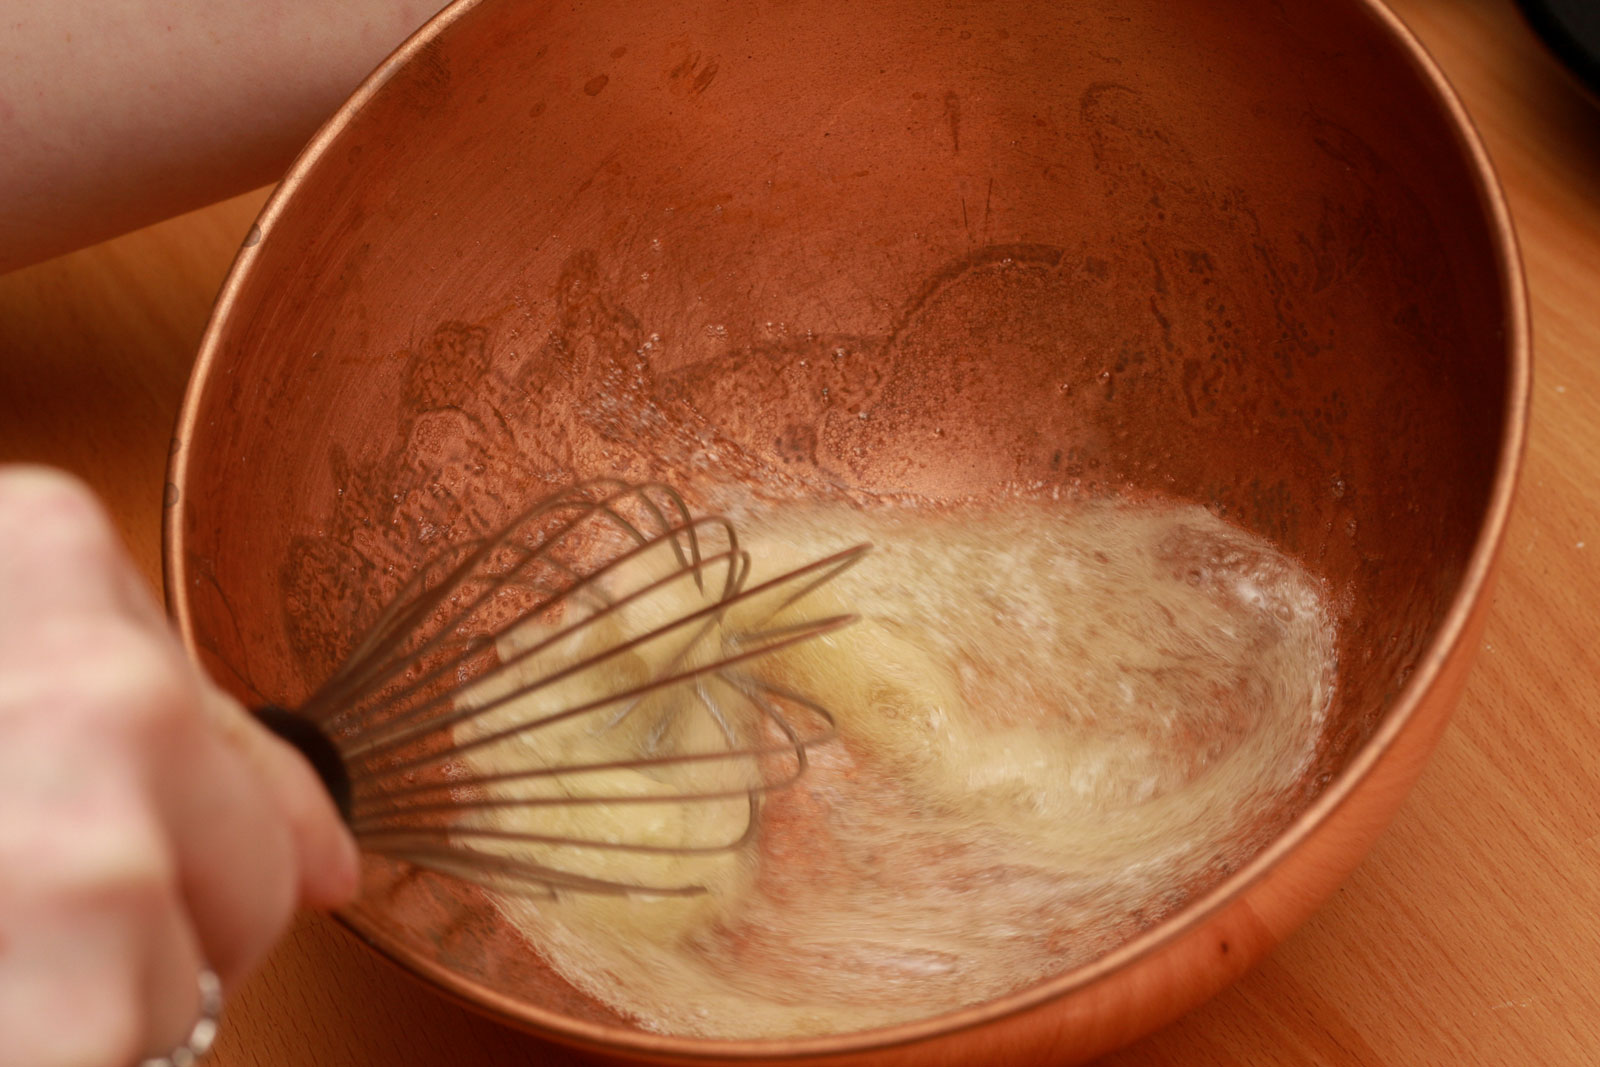 whisking egg whites in a copper bowl - foamy